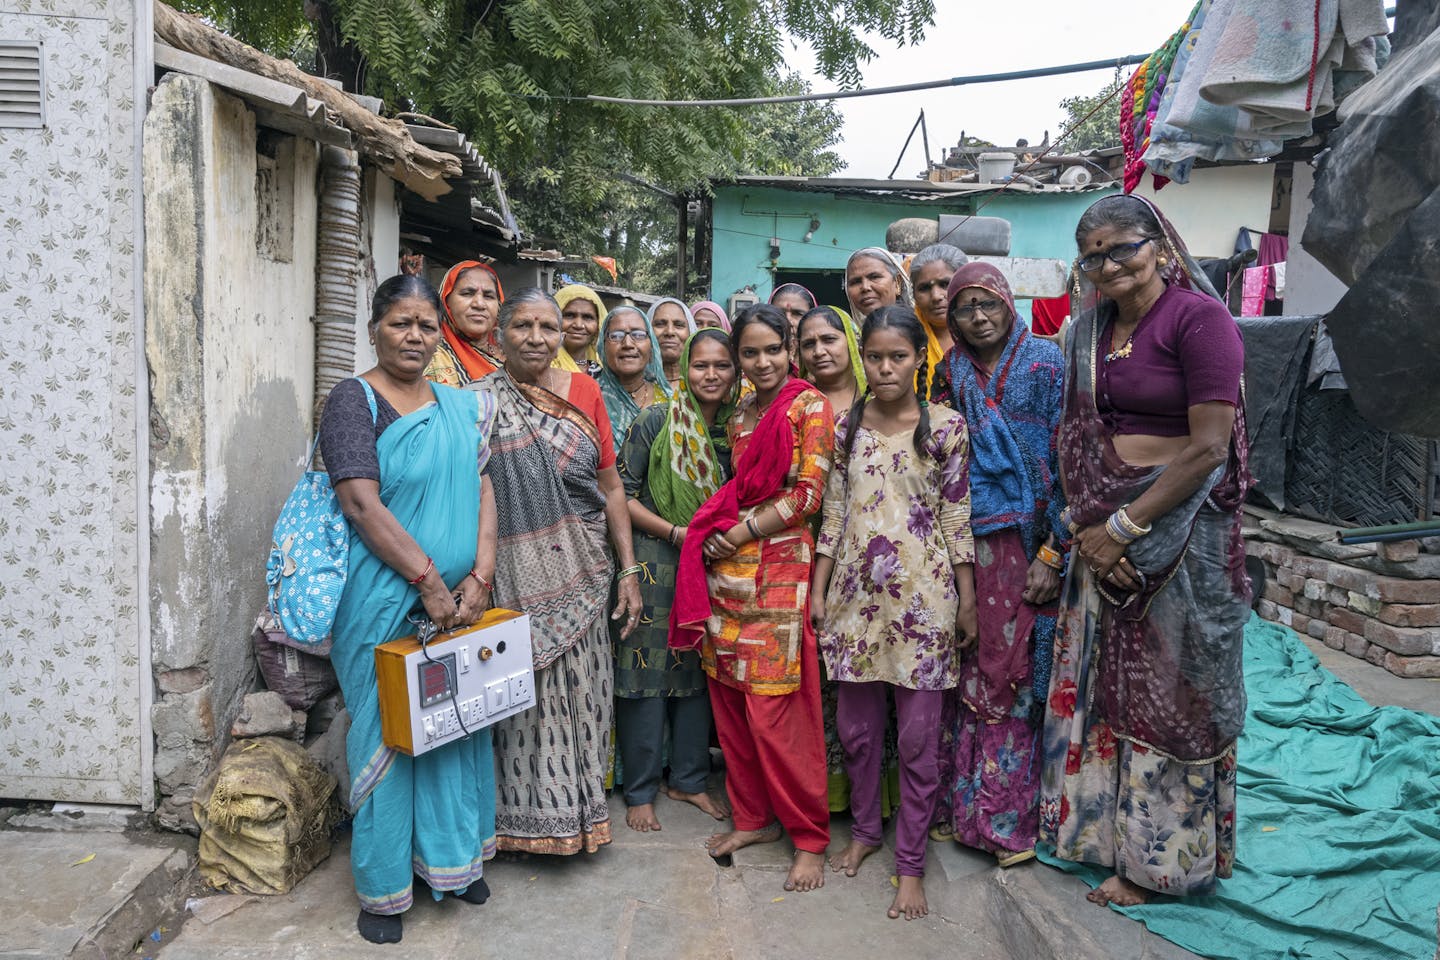 In Ahmedabad, women act to make slums climate-resilient, one house at a time